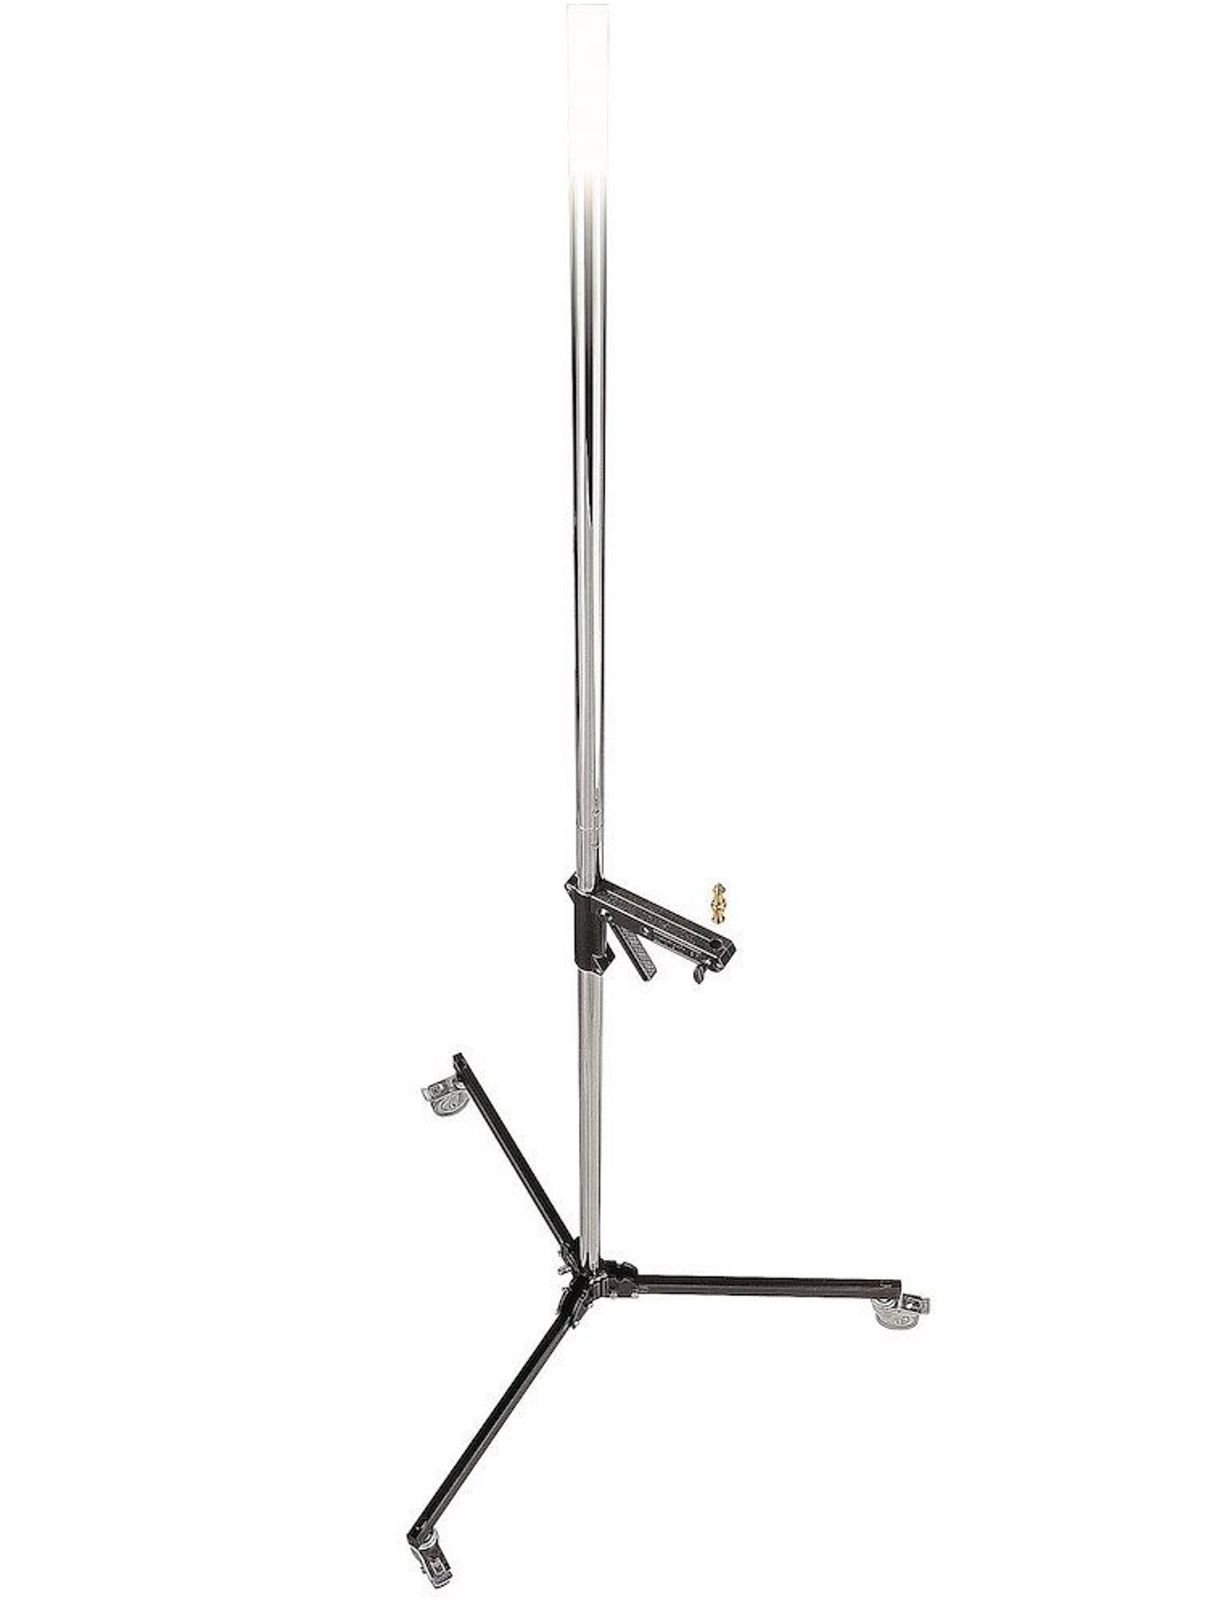 MANFROTTO - Back Chrome Column Light Stand w/ Locking Wheels, Removable Base 